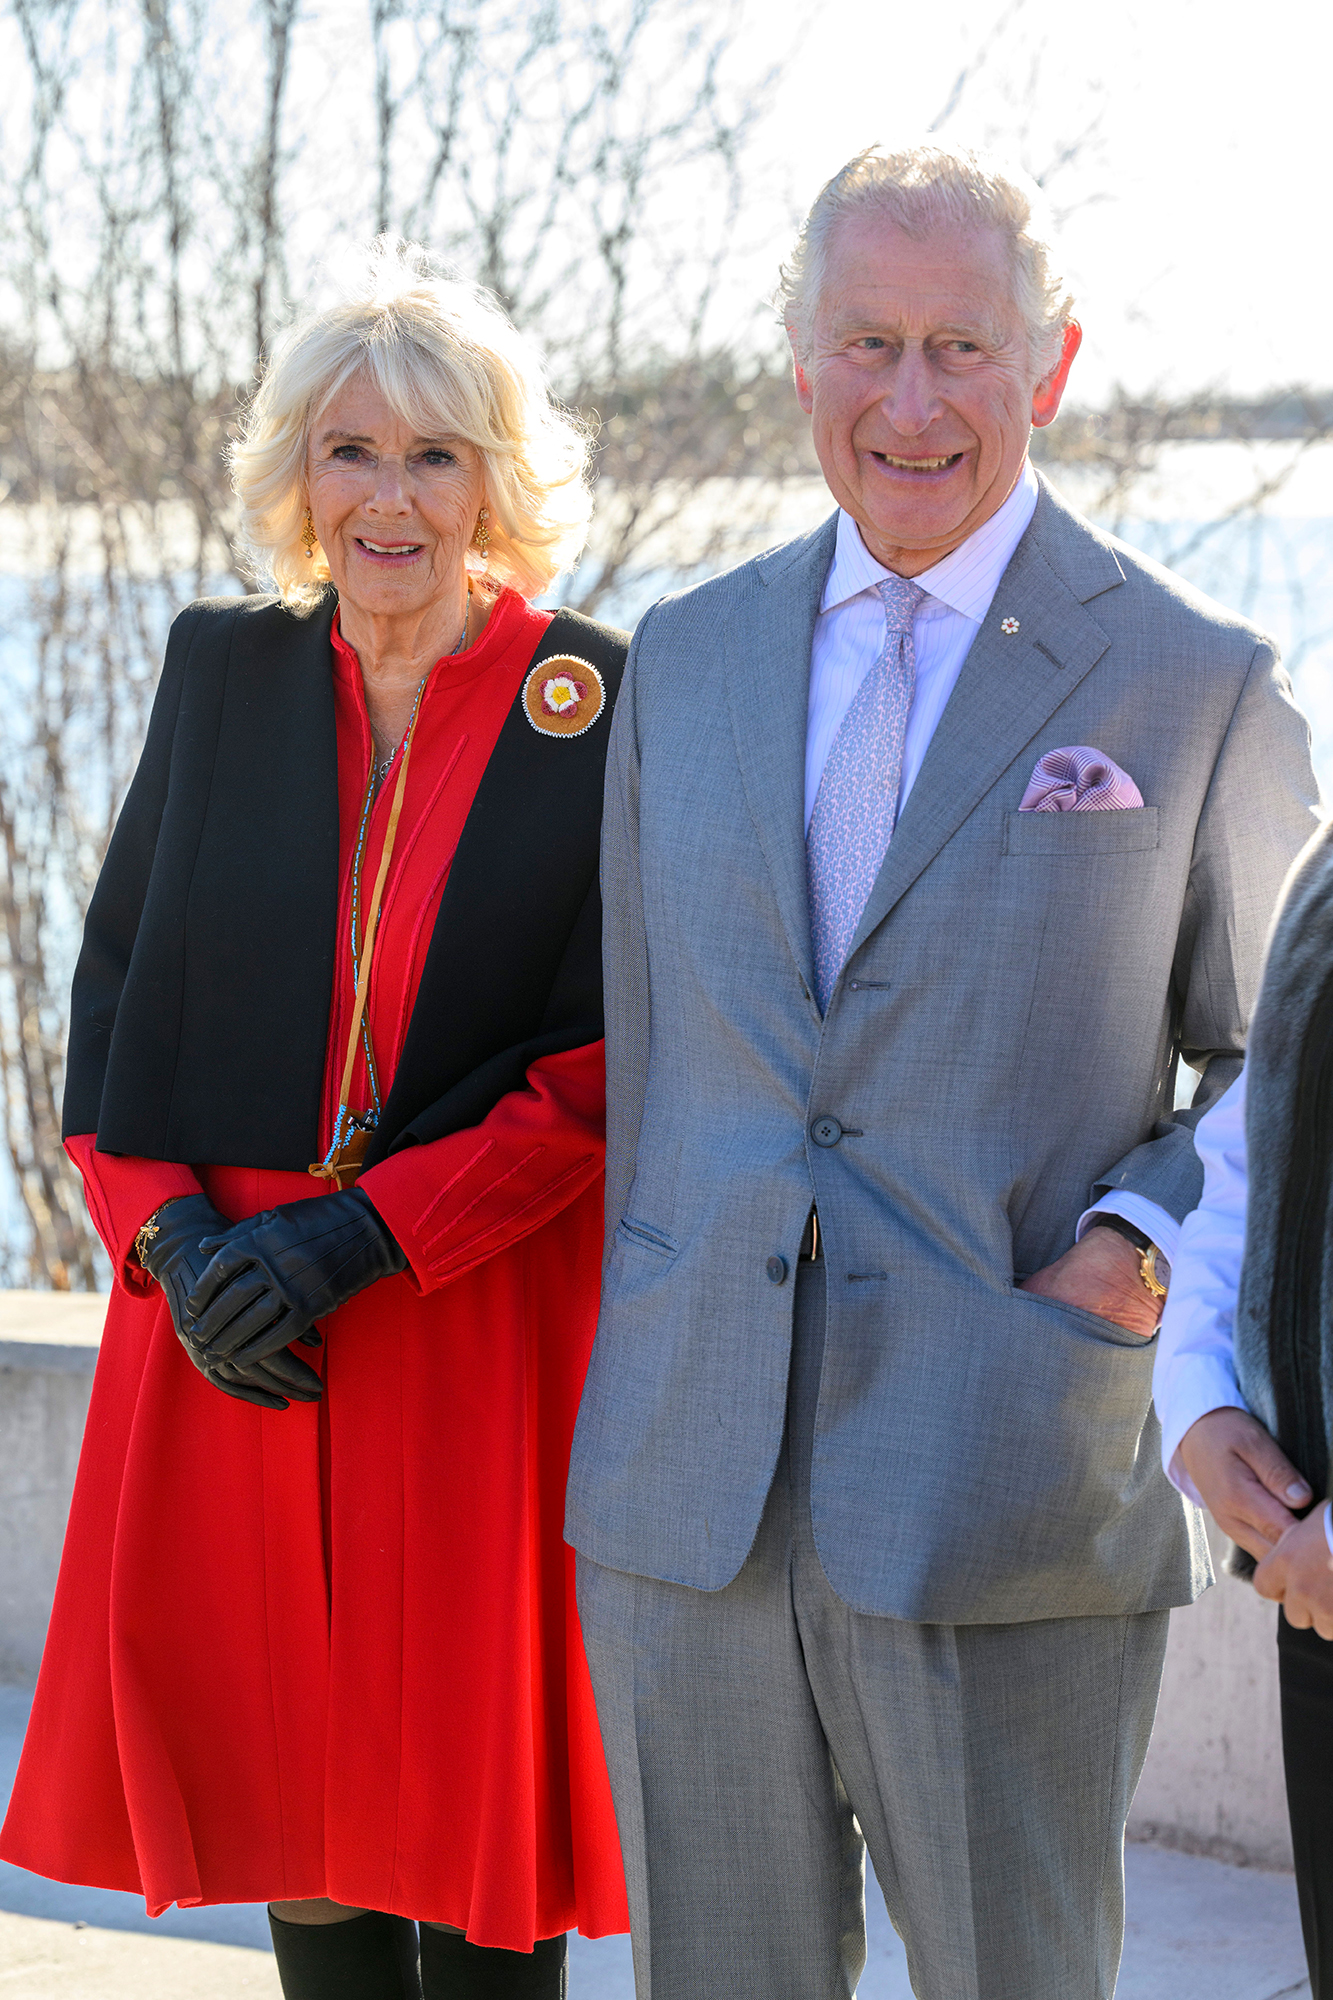 Duchess Camilla Opens Up About Prioritizing Prince Charles Marriage Amid Busy Schedules: ‘It's Not Easy’